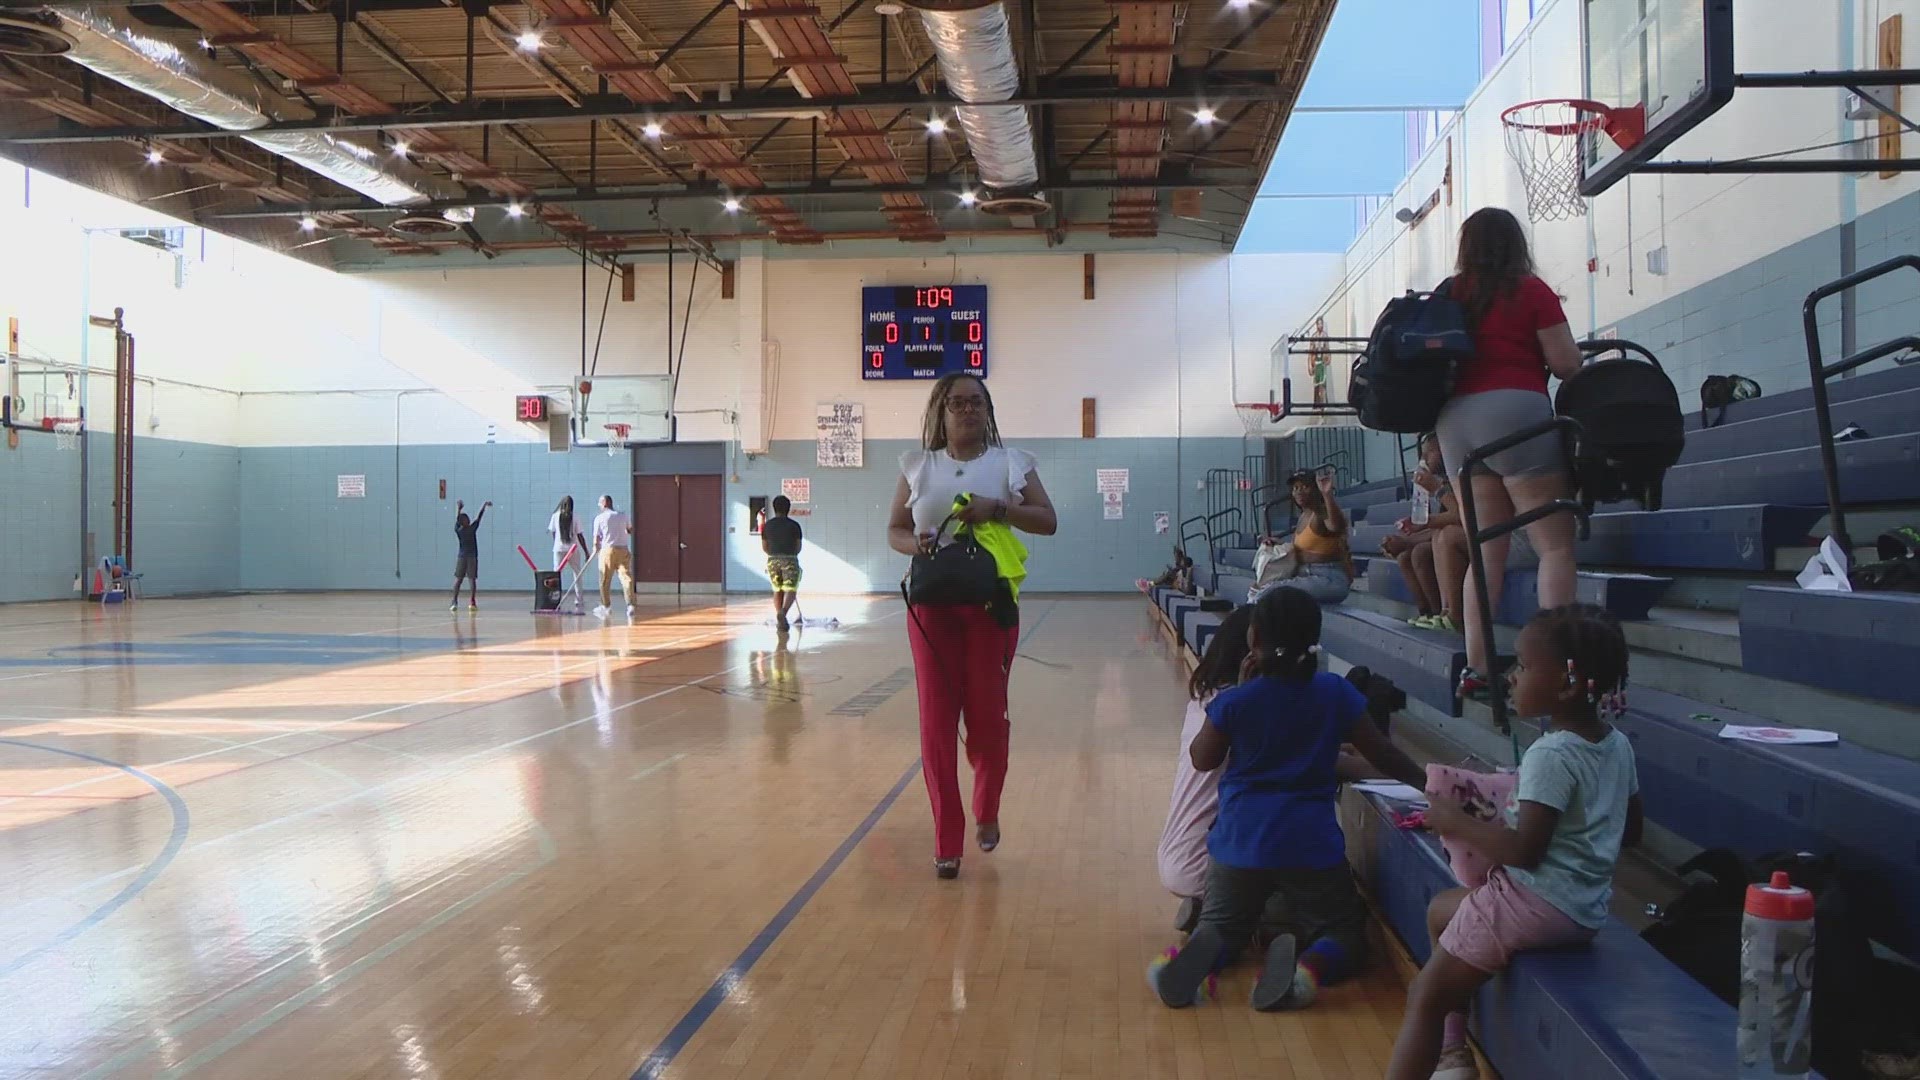 St. Louis has rolled out new youth programming to try and create alternatives for kids caught up in crime. Leaders say the new programs could take time to catch on.